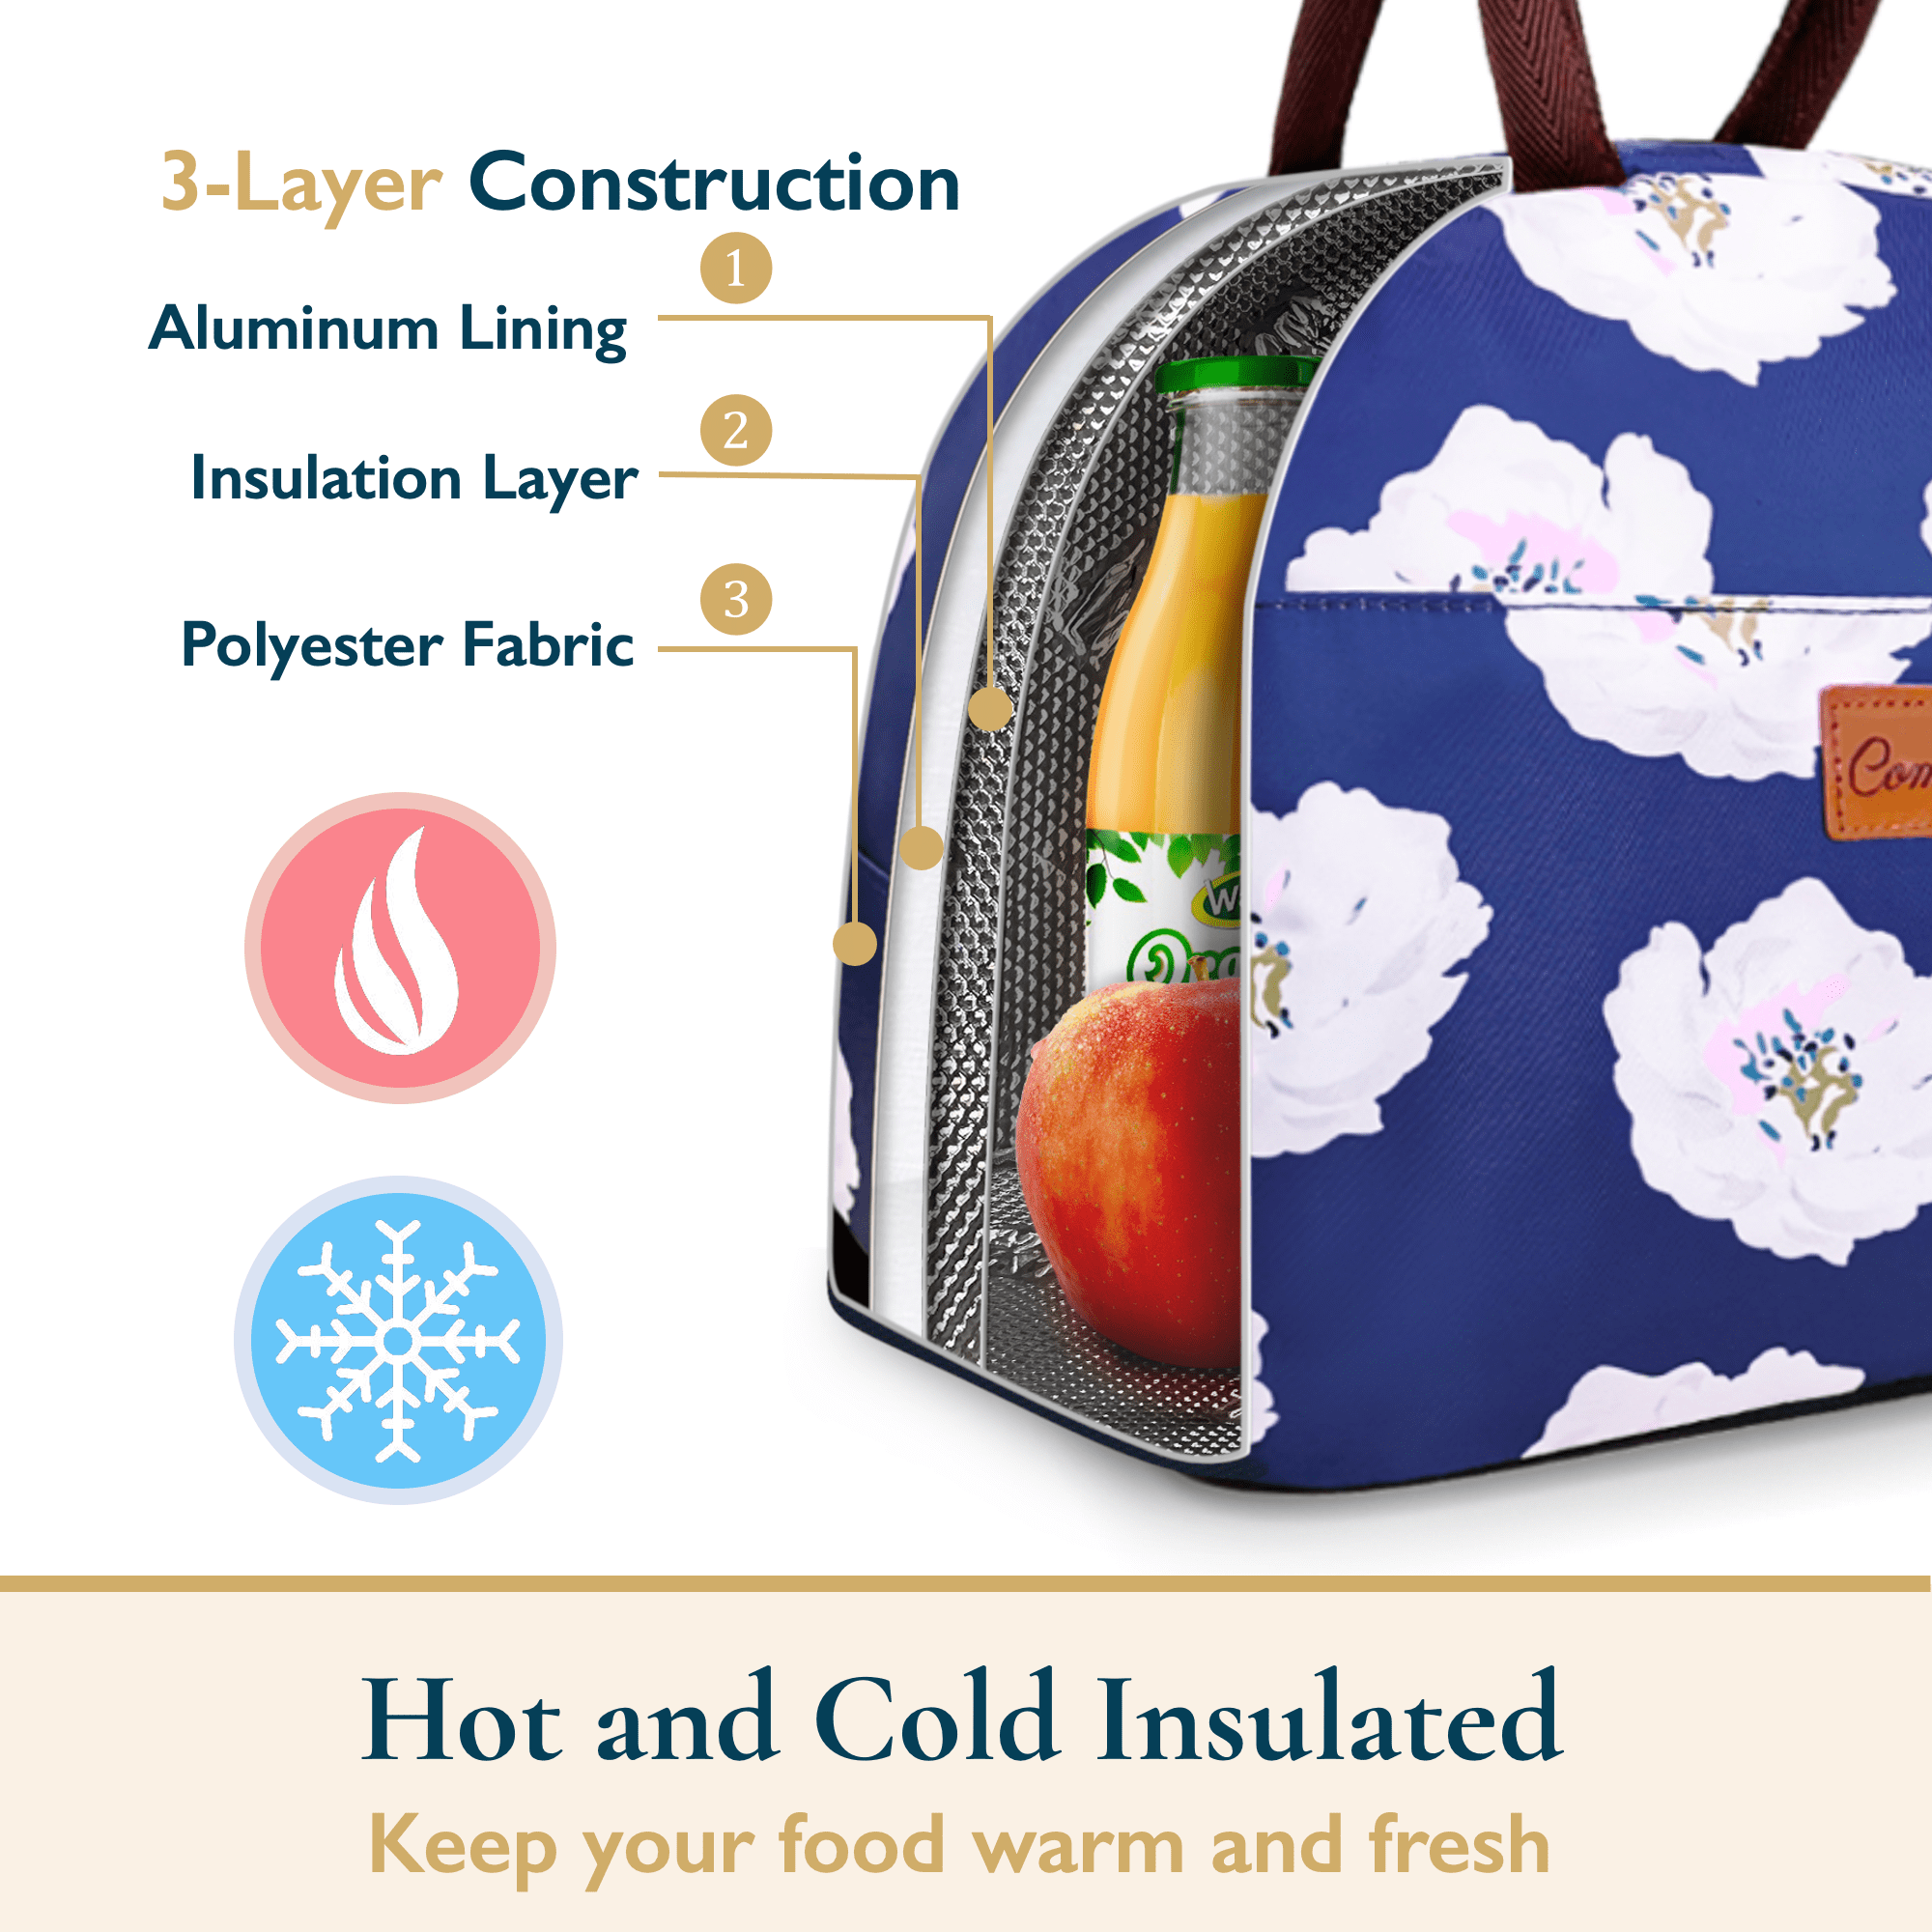 Pack It Lunch Kids High Aesthetic Insulation Bag Lunch Box Portable Bag  Office Workers Fit And